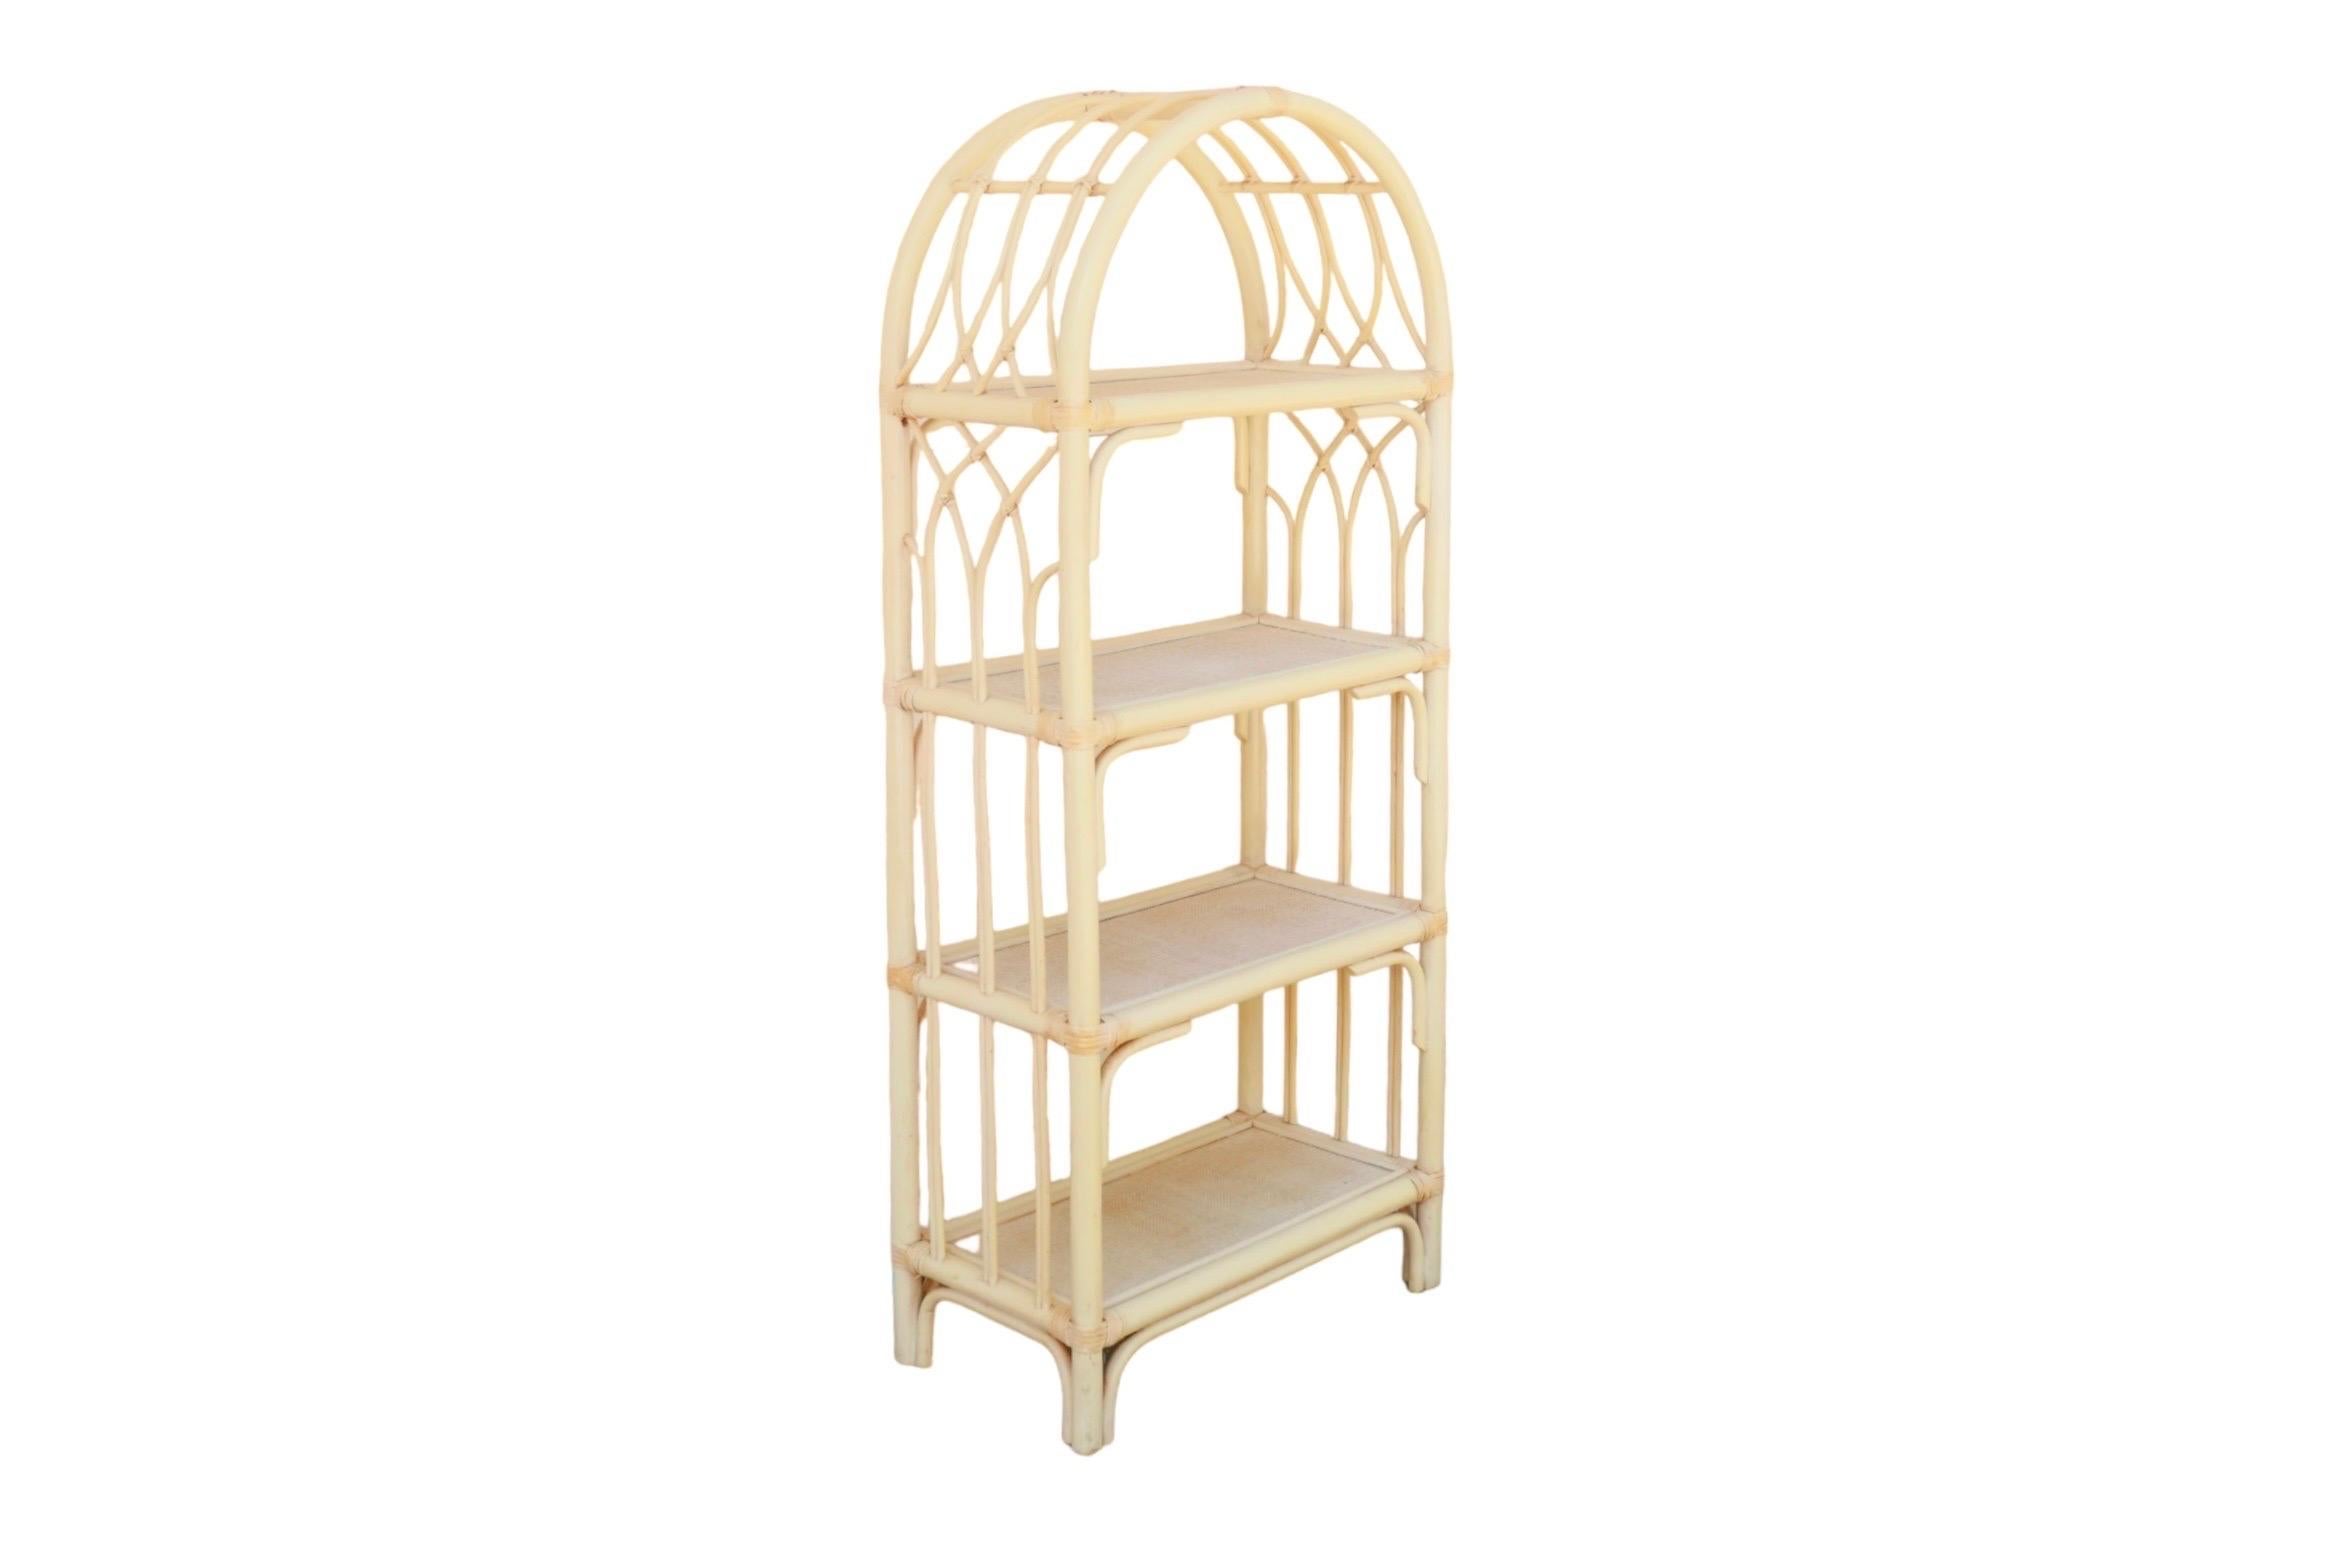 Bamboo & Rattan Etagere In Good Condition For Sale In Bradenton, FL